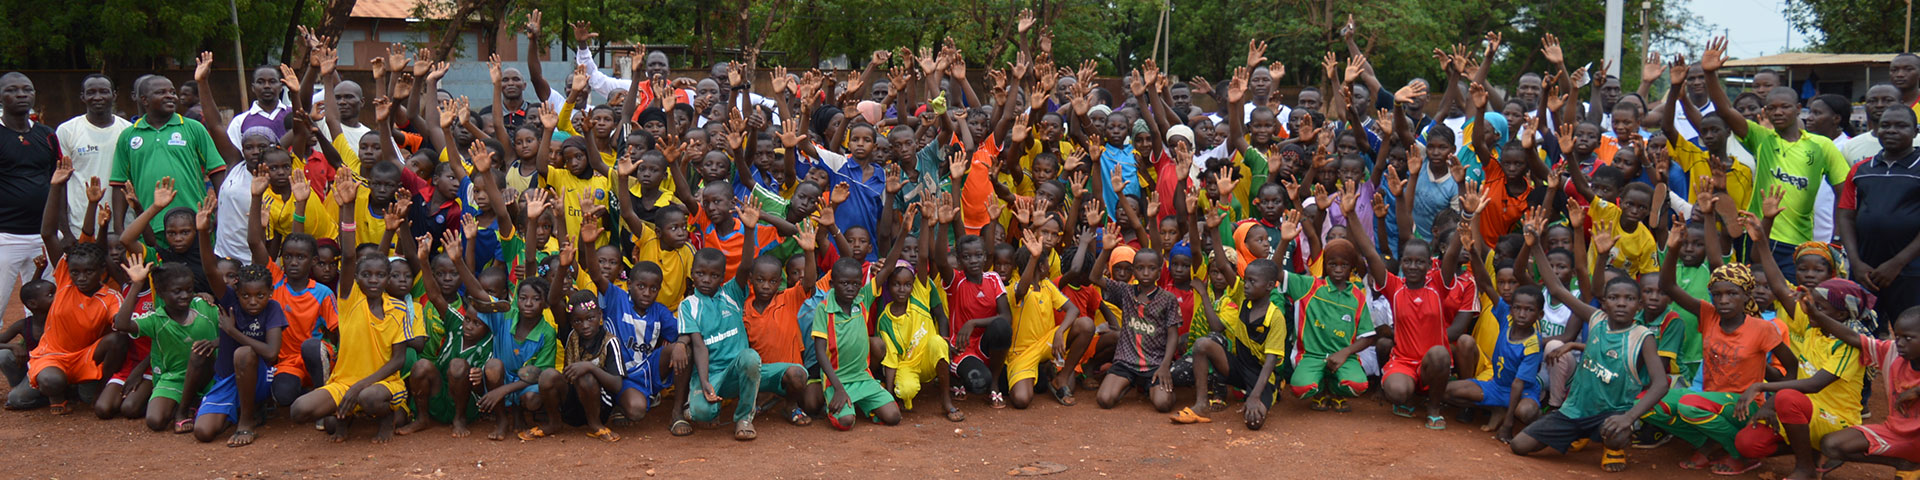 Many children in sportswear gathered for a group picture.